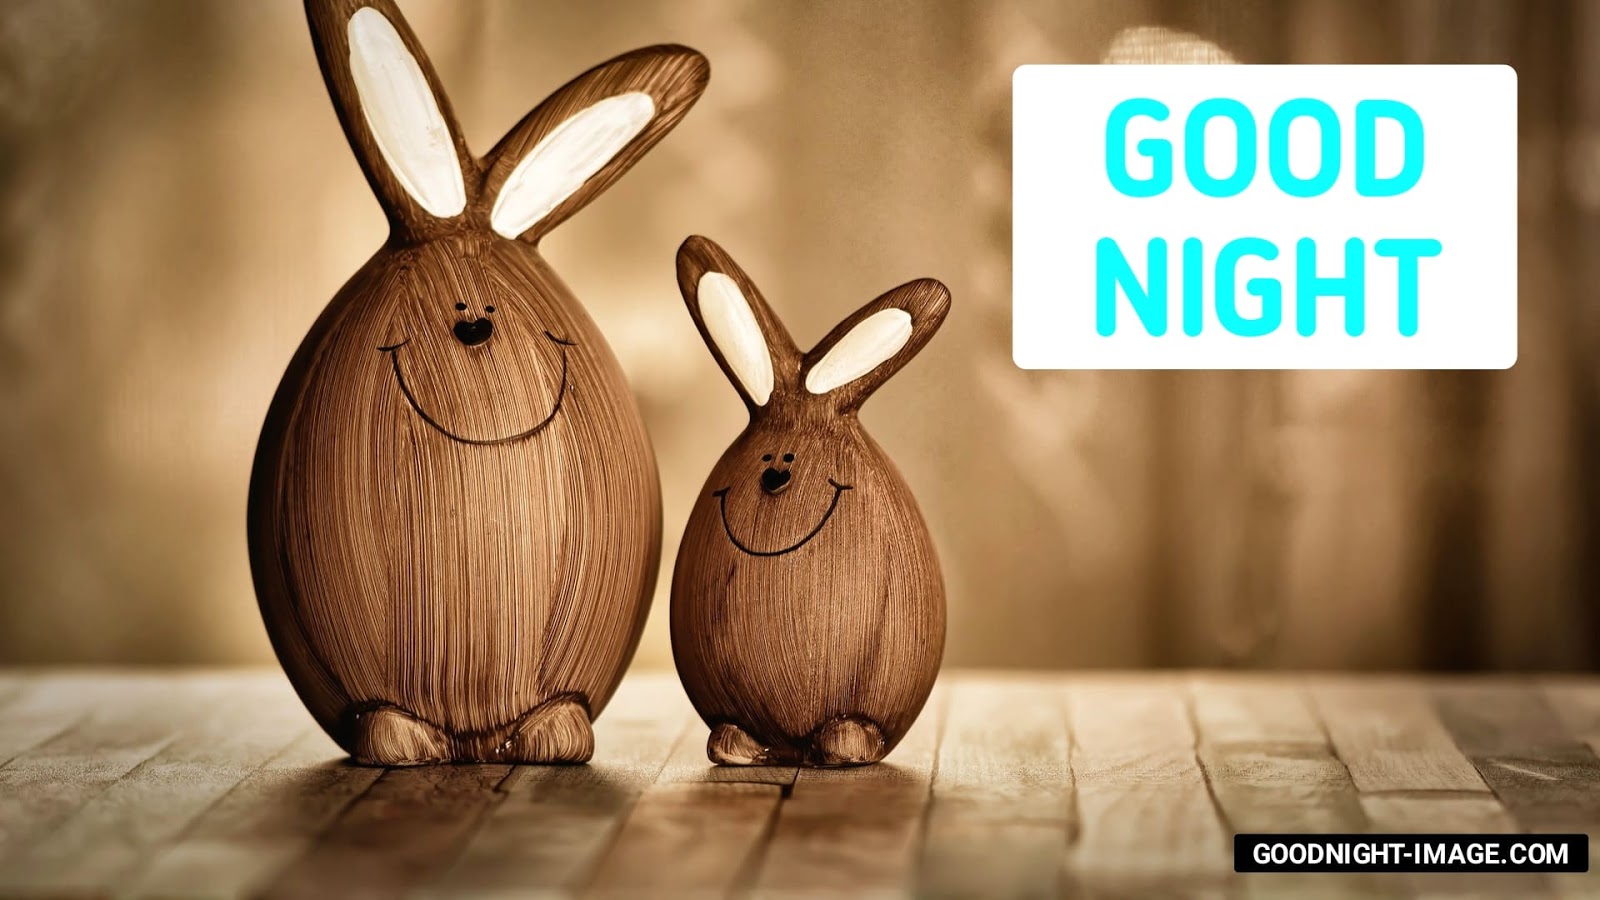 So Funny Good Night Images - Easter - 1600x900 Wallpaper 